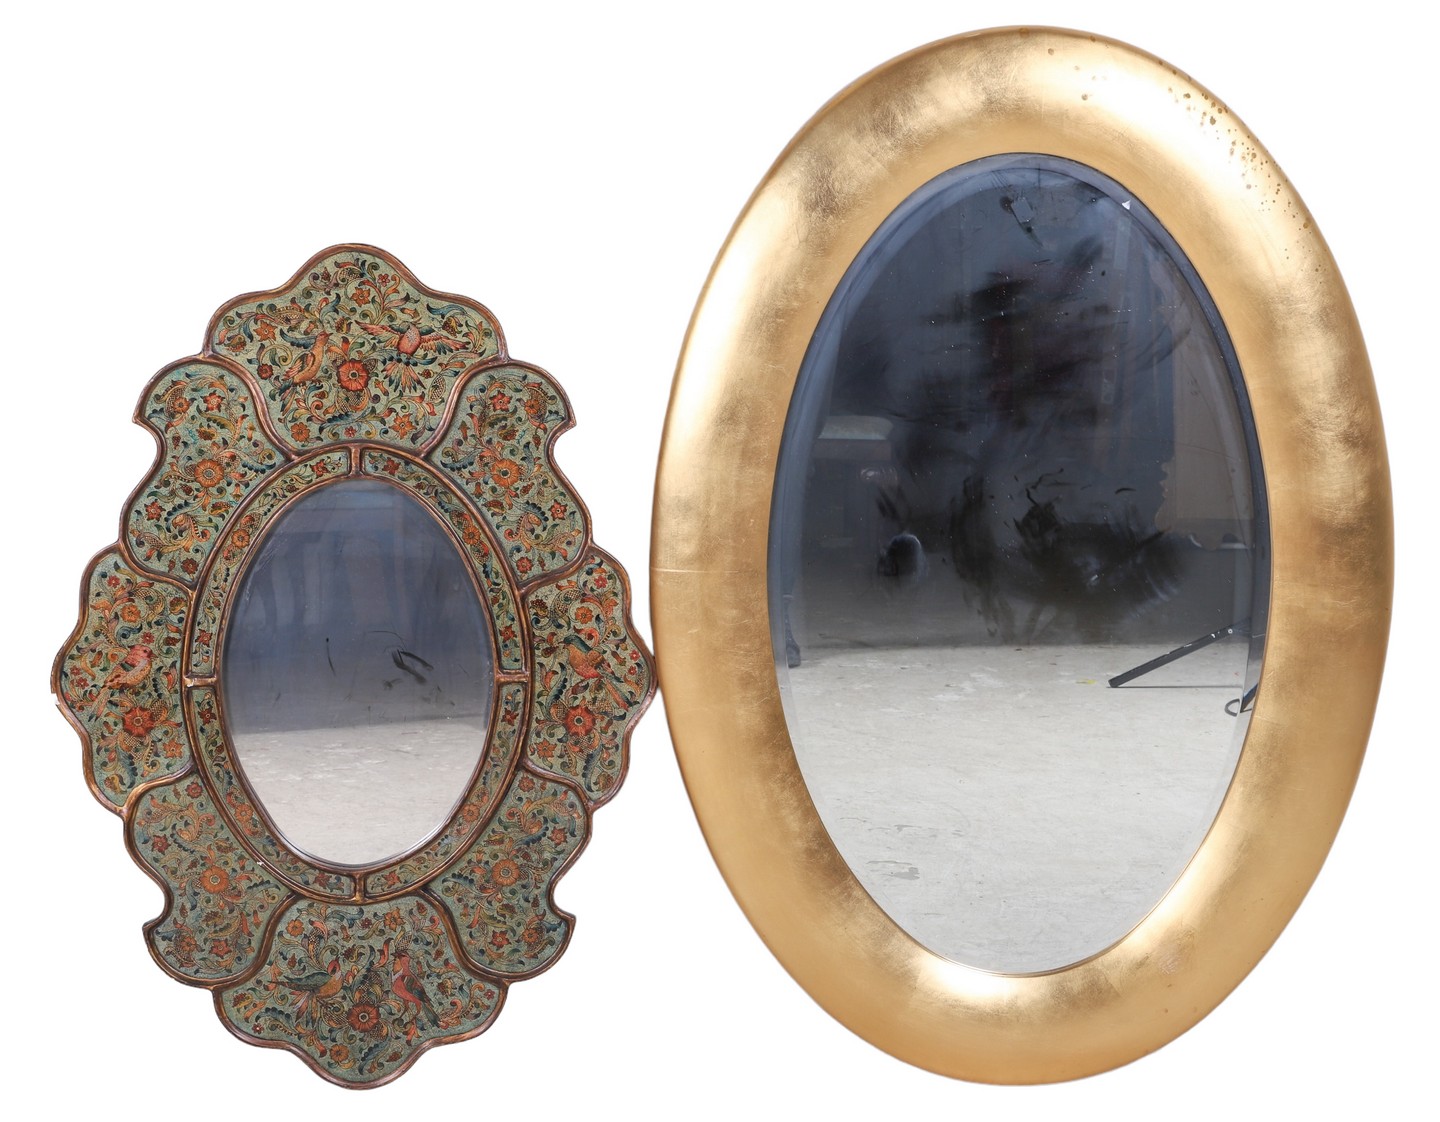  2 Contemporary hanging wall mirrors  317e23